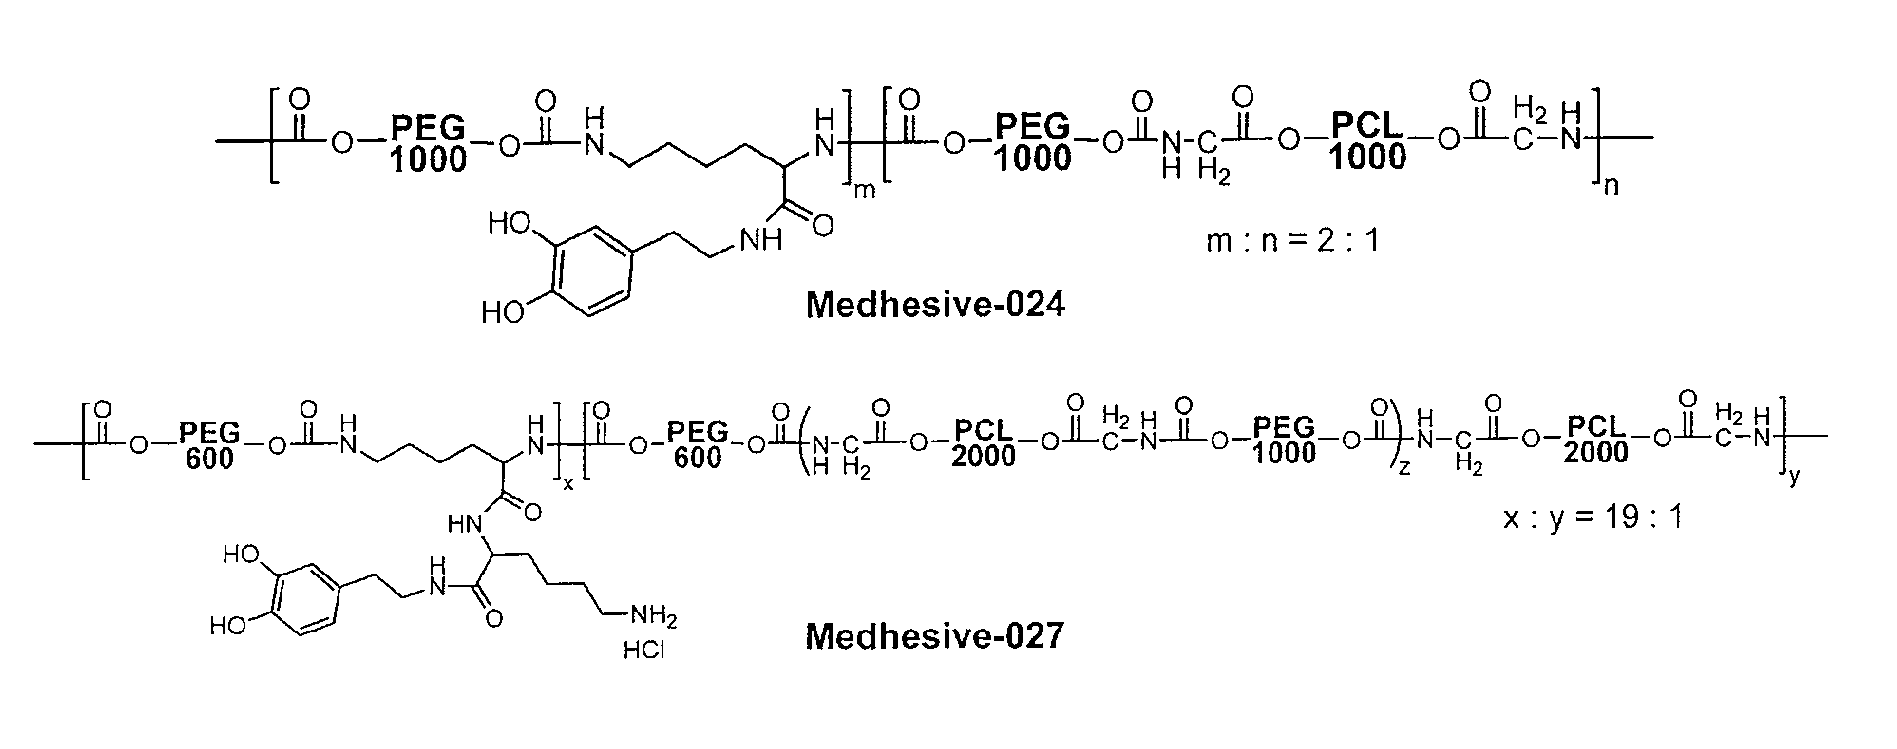 Bioadhesive constructs with polymer blends